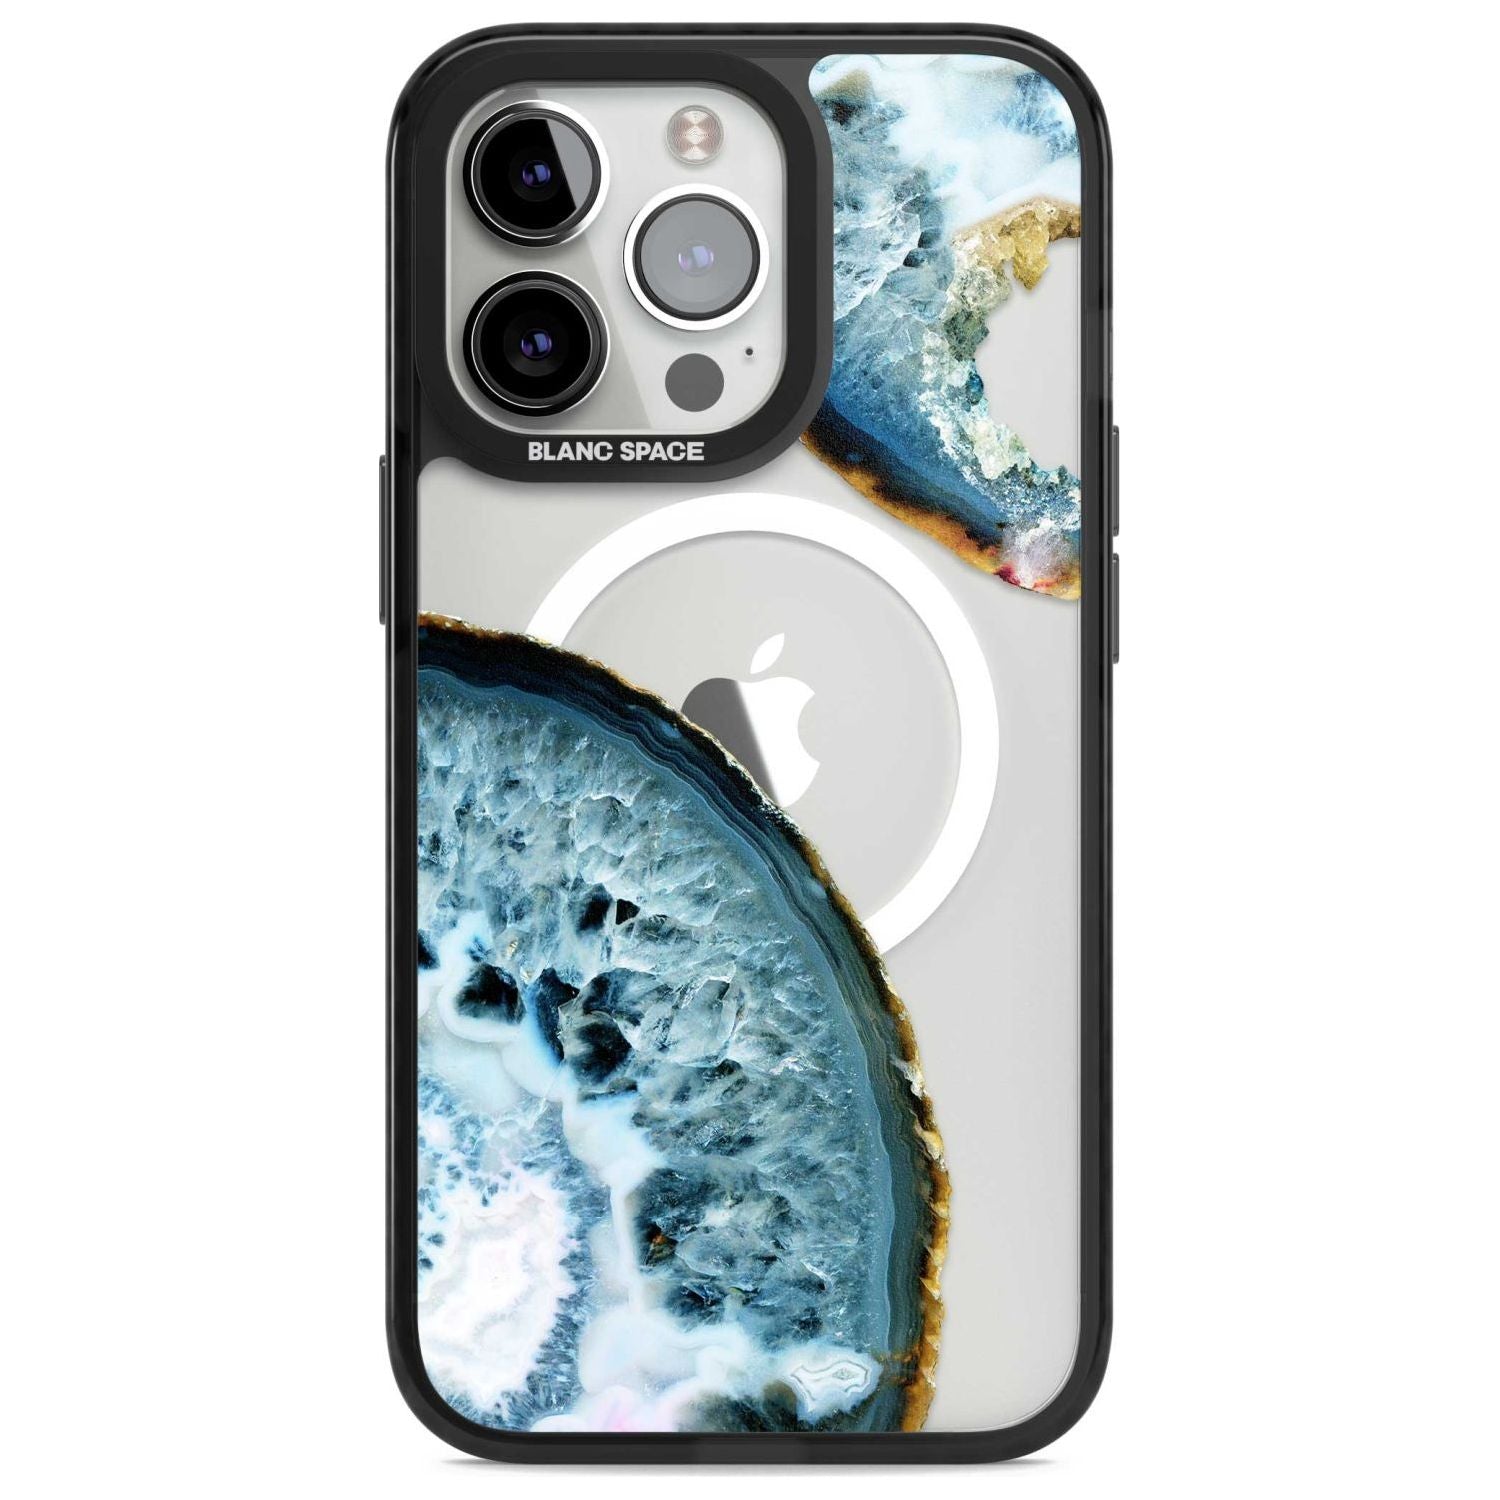 Blue, White & Yellow Agate Gemstone Phone Case iPhone 15 Pro Max / Magsafe Black Impact Case,iPhone 15 Pro / Magsafe Black Impact Case,iPhone 14 Pro Max / Magsafe Black Impact Case,iPhone 14 Pro / Magsafe Black Impact Case,iPhone 13 Pro / Magsafe Black Impact Case Blanc Space